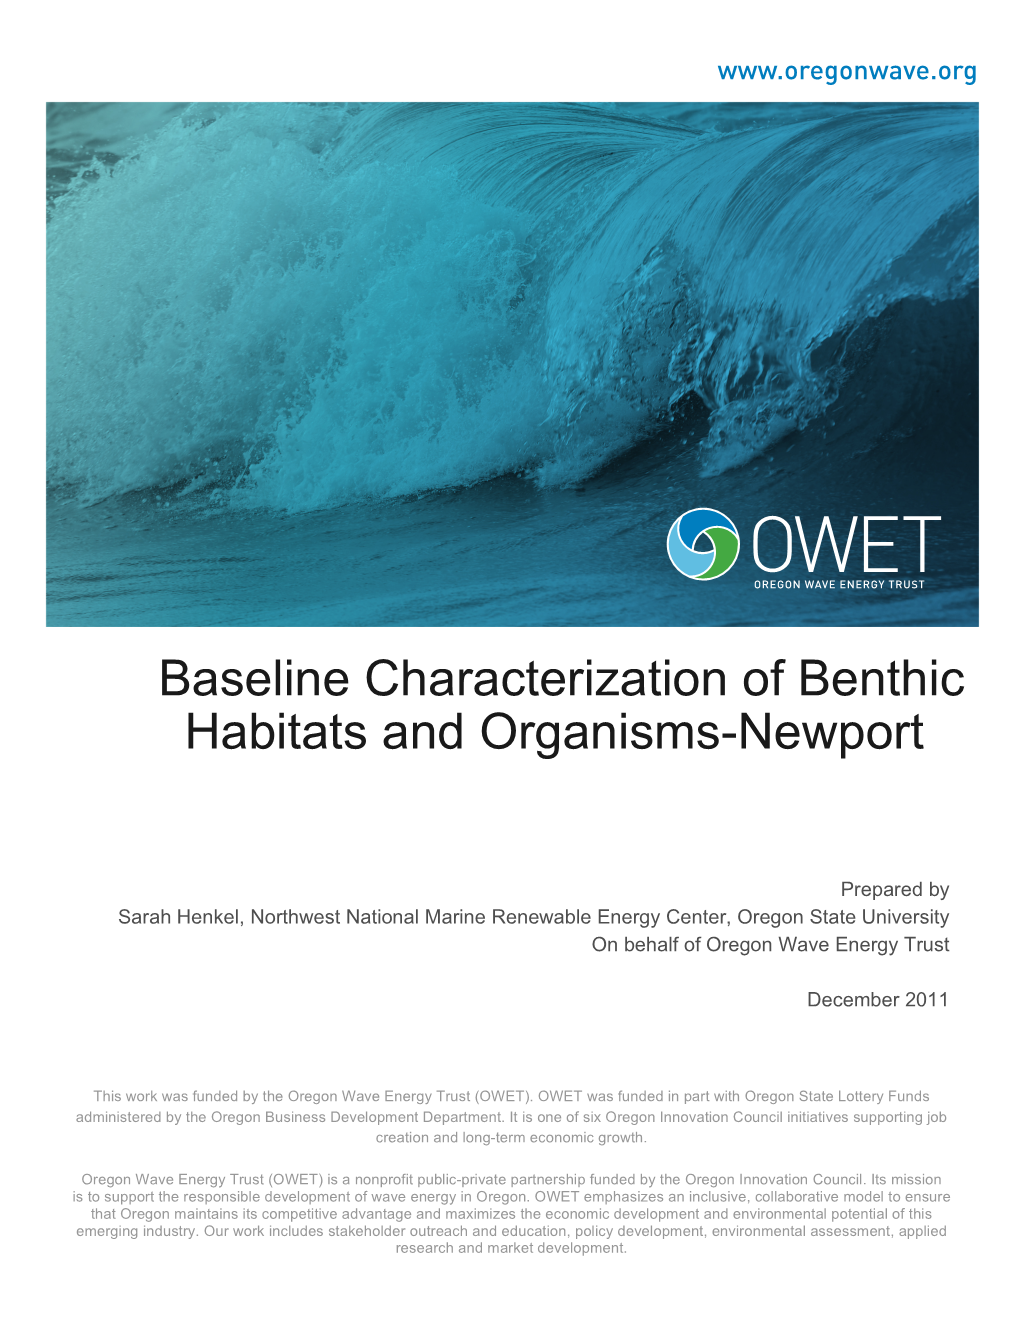 Baseline Characterization and Monitoring of Oregon State University’S Ocean Test Facility Site